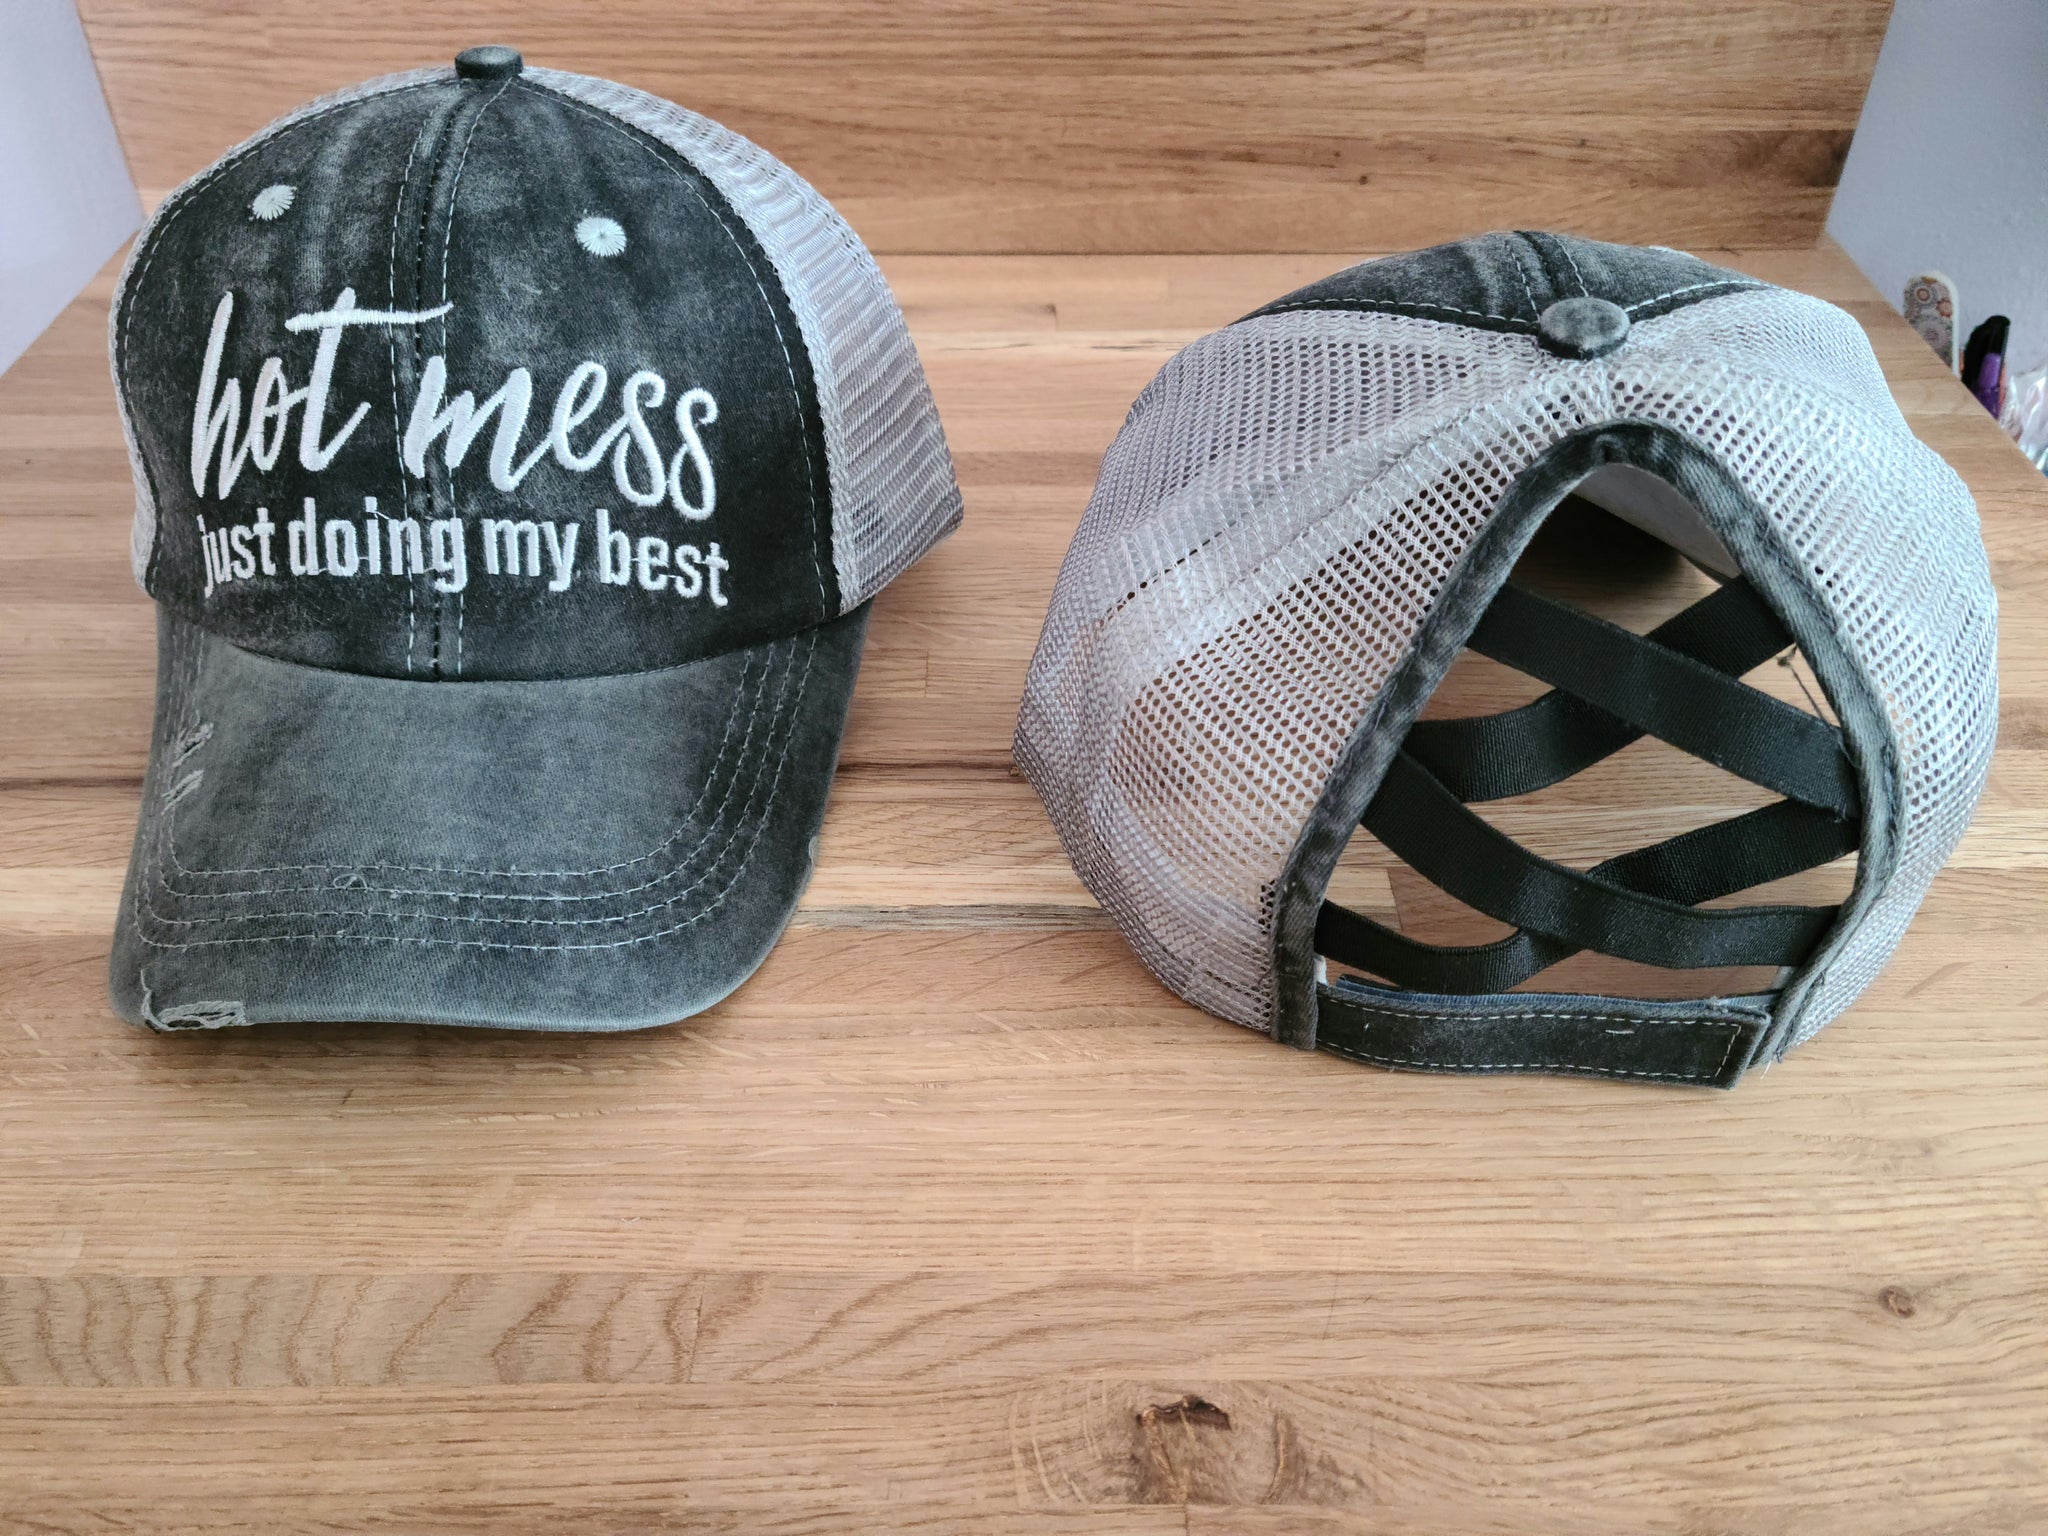 Distressed Hot Mess Doing my Best Criss Cross Ponytail Hat - 2 Color options - Gals and Dogs Boutique Limited